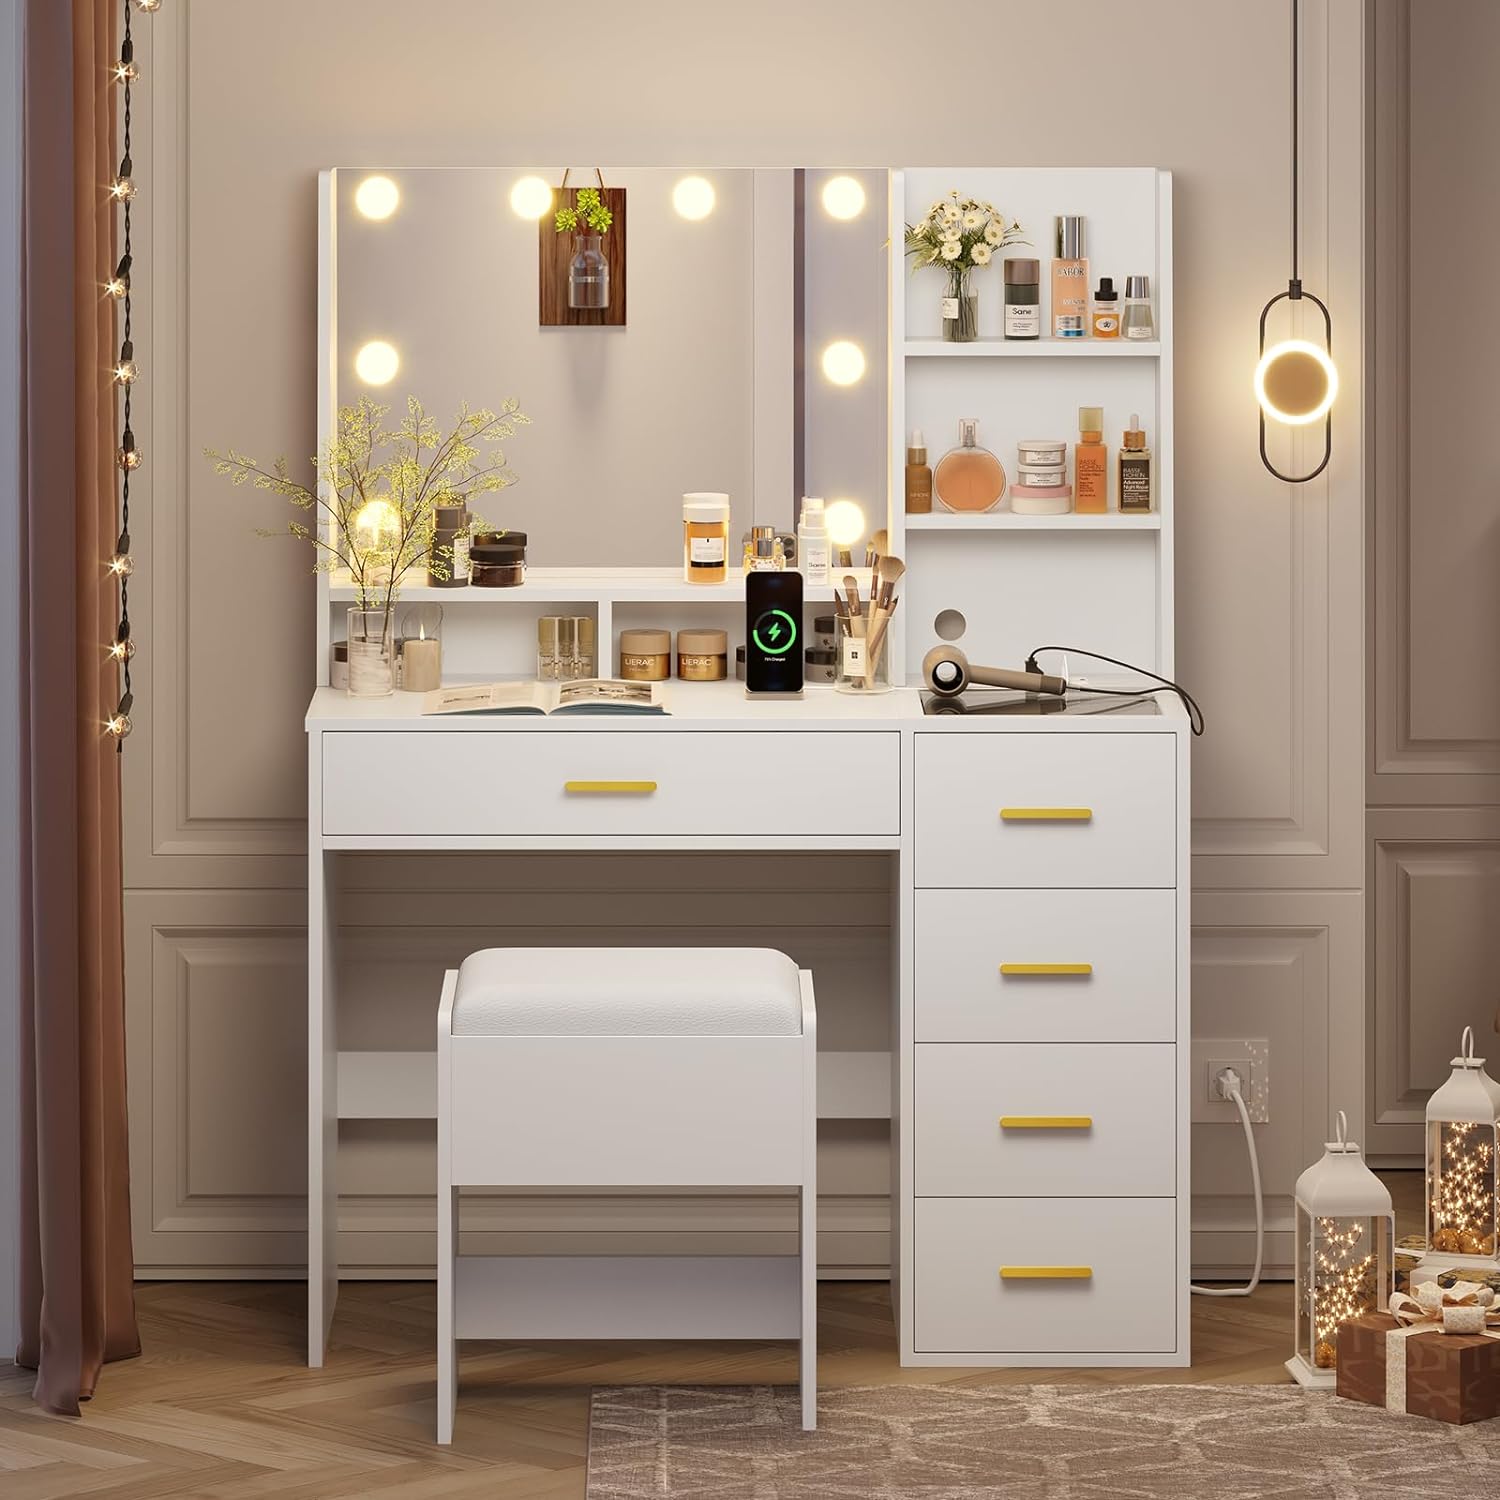 VIAGDO Makeup Vanity Set with Mirror and Lights, Vanity Desk with Charging Station & Cushioned Stool, White Bedroom Vanity Table with Drawers, Jewelry Box, Open Storage Shelves